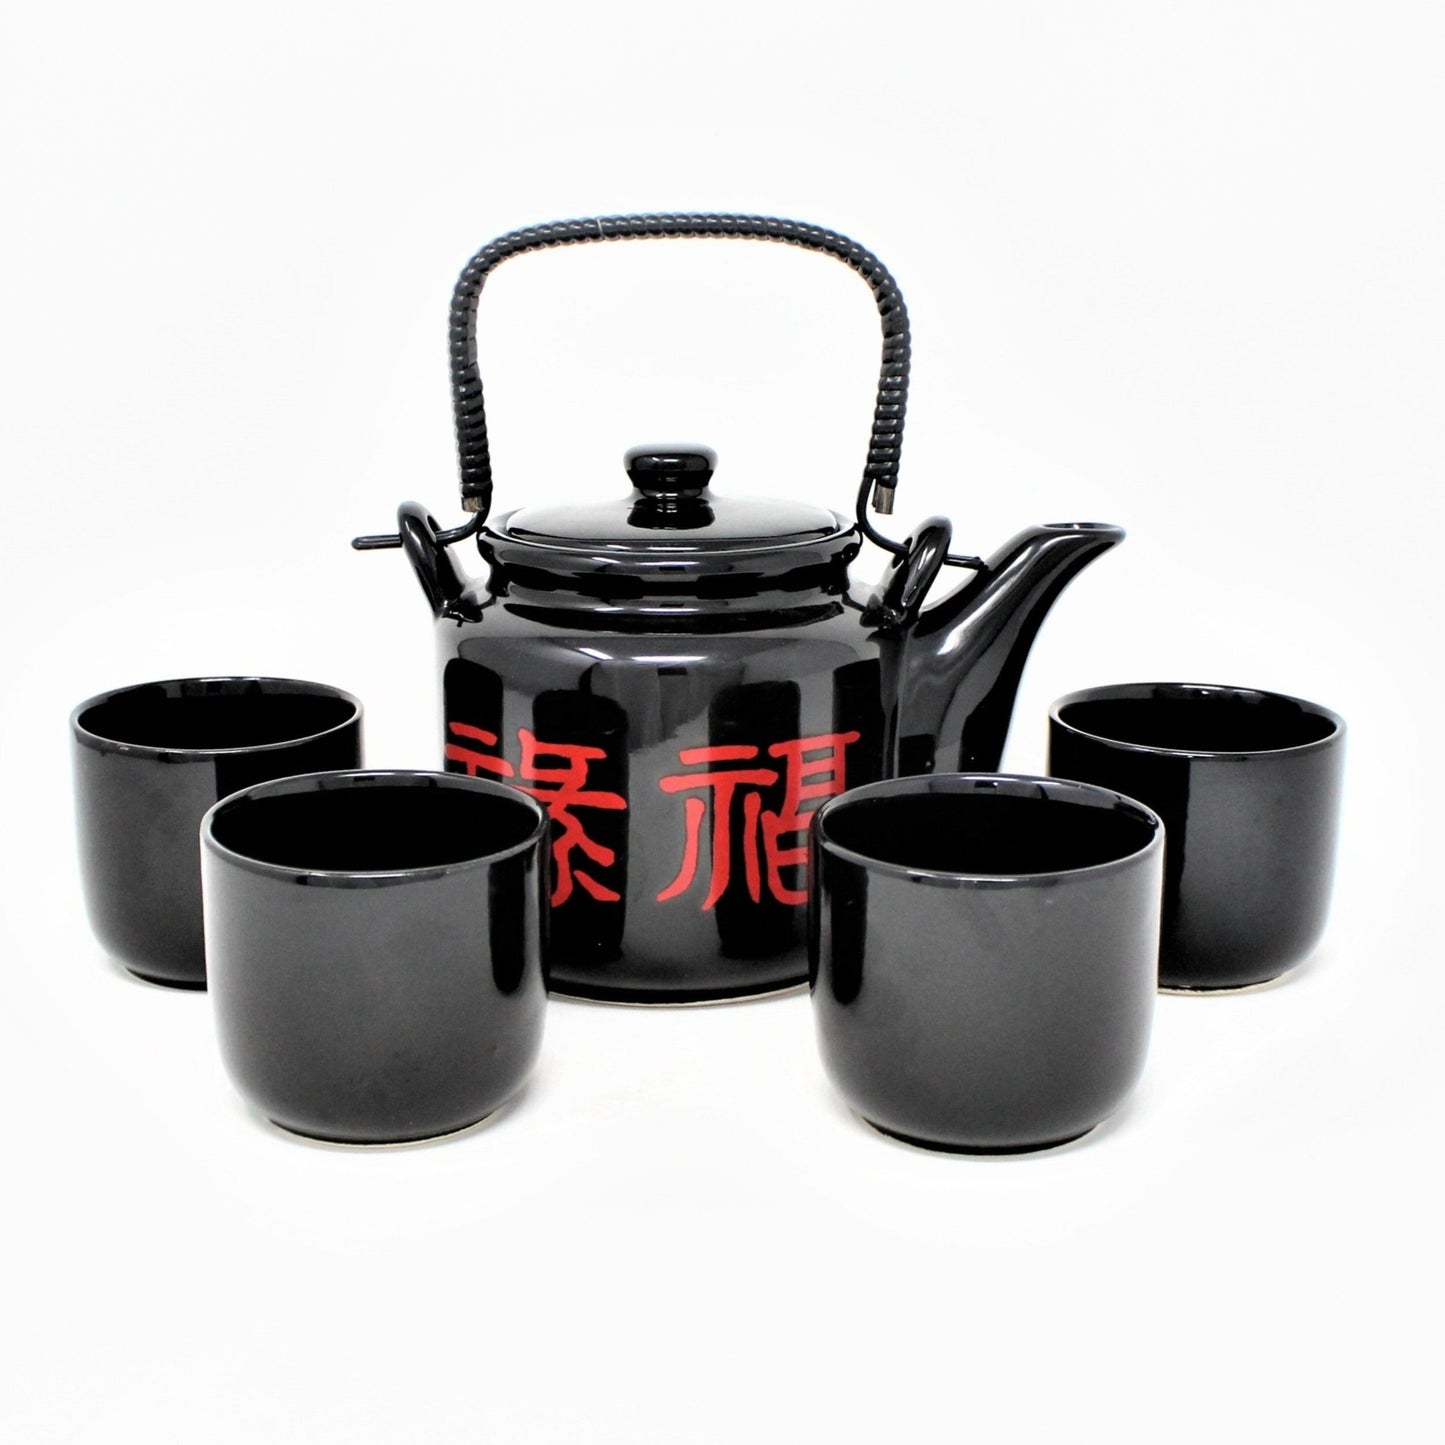 Tea Set, Teapot & 4 Teacups, Black with Red Chinese Characters, Vintage Taiwan